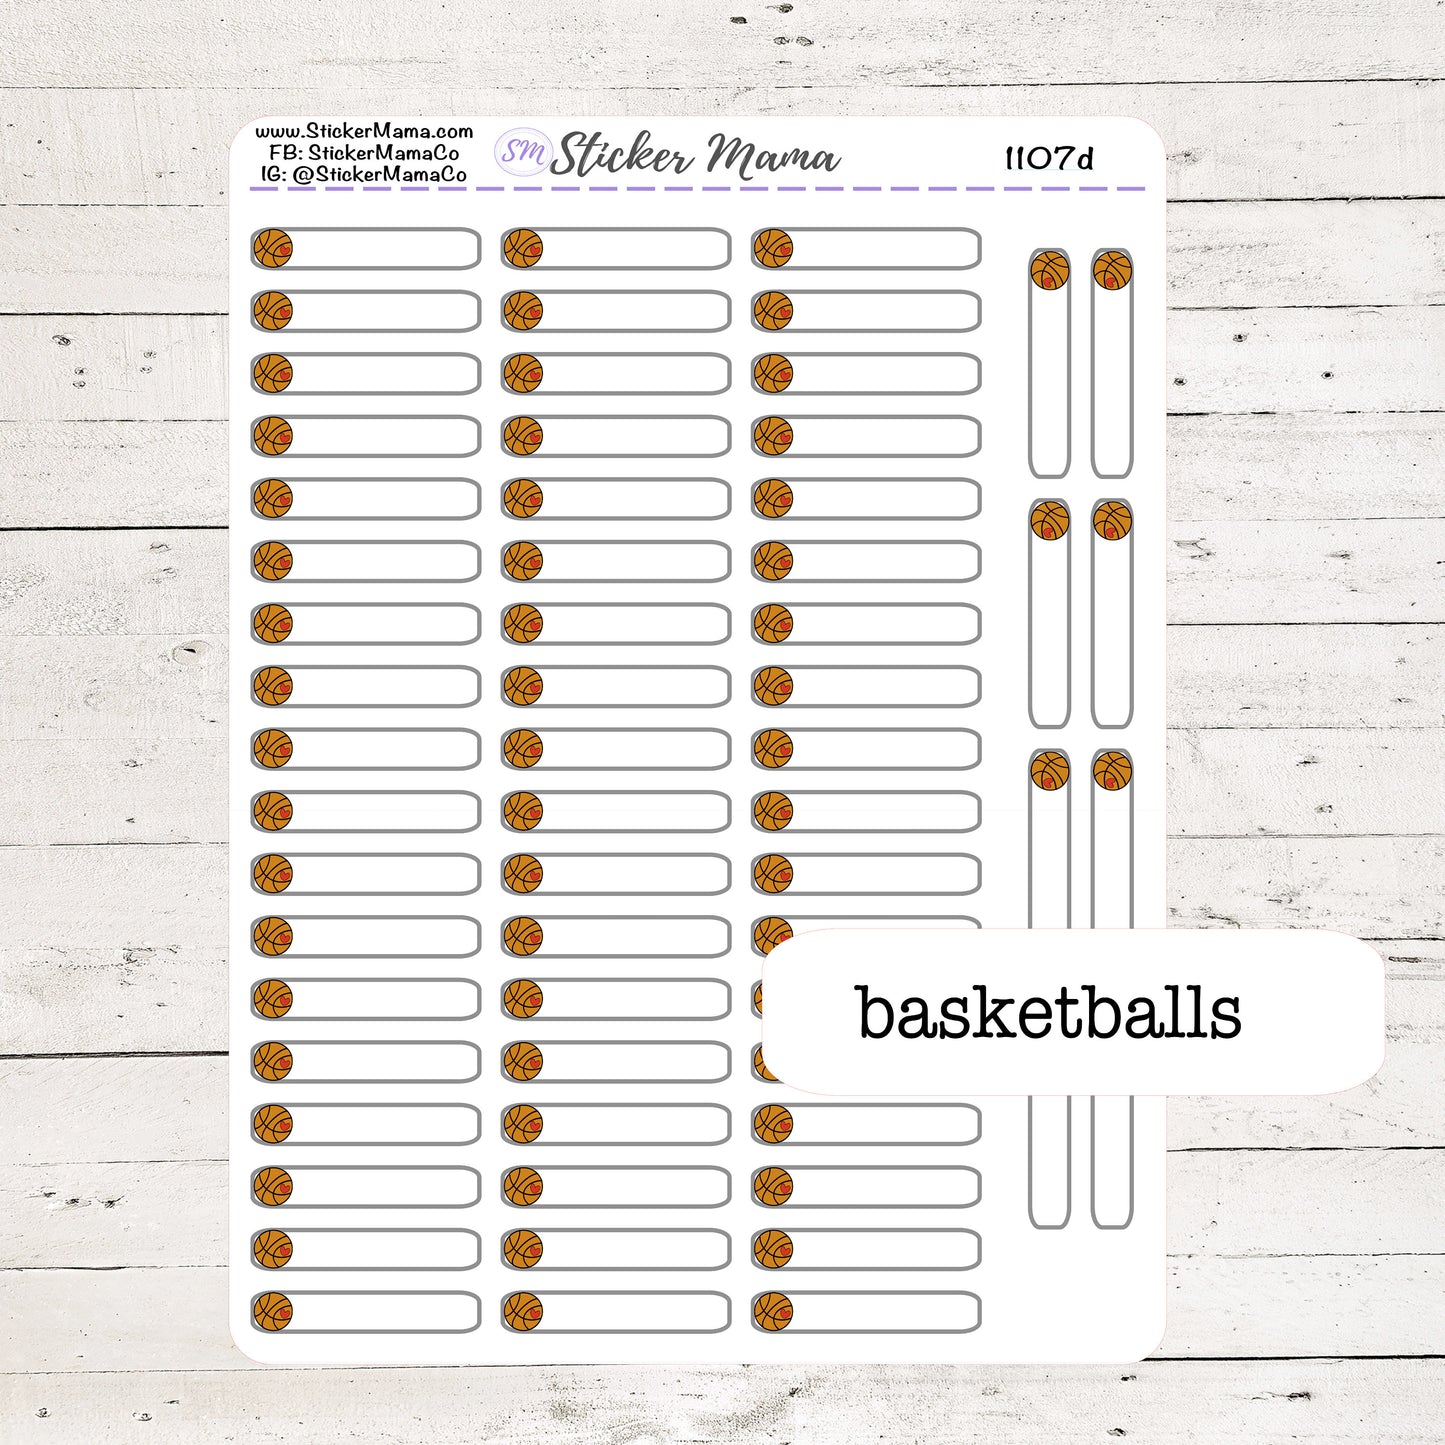 1107d - DOODLE BASKETBALL PLANNER Label Stickers  - Basketball Stickers - Basketball Games - Basketball Practice